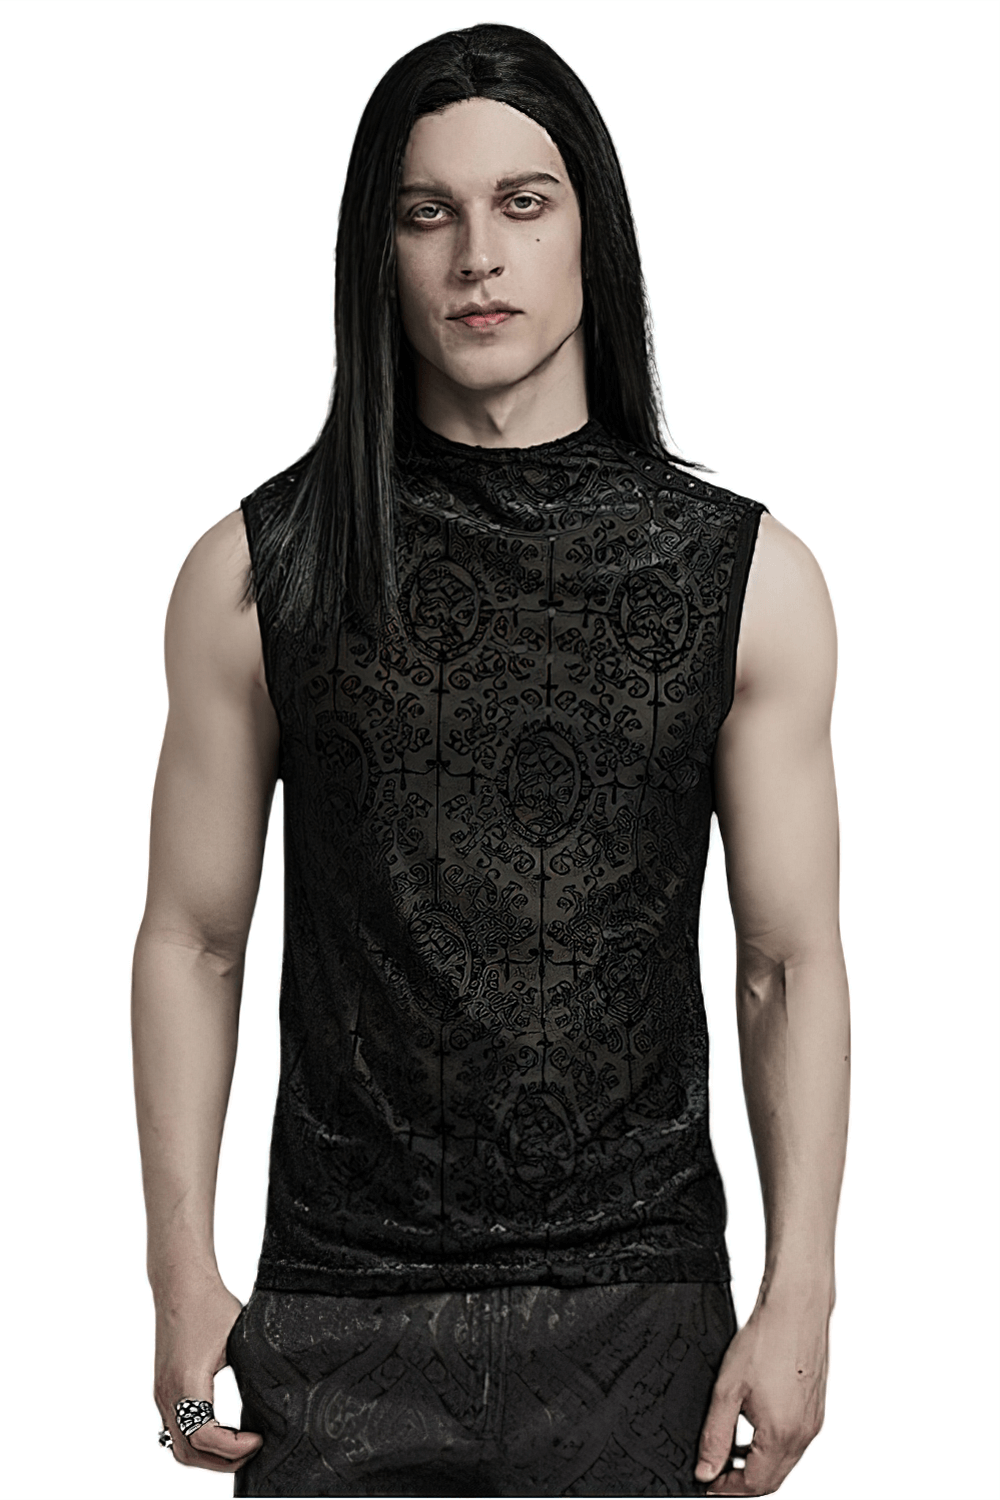 Gothic Mesh Black Top with Flocking Pattern for Men